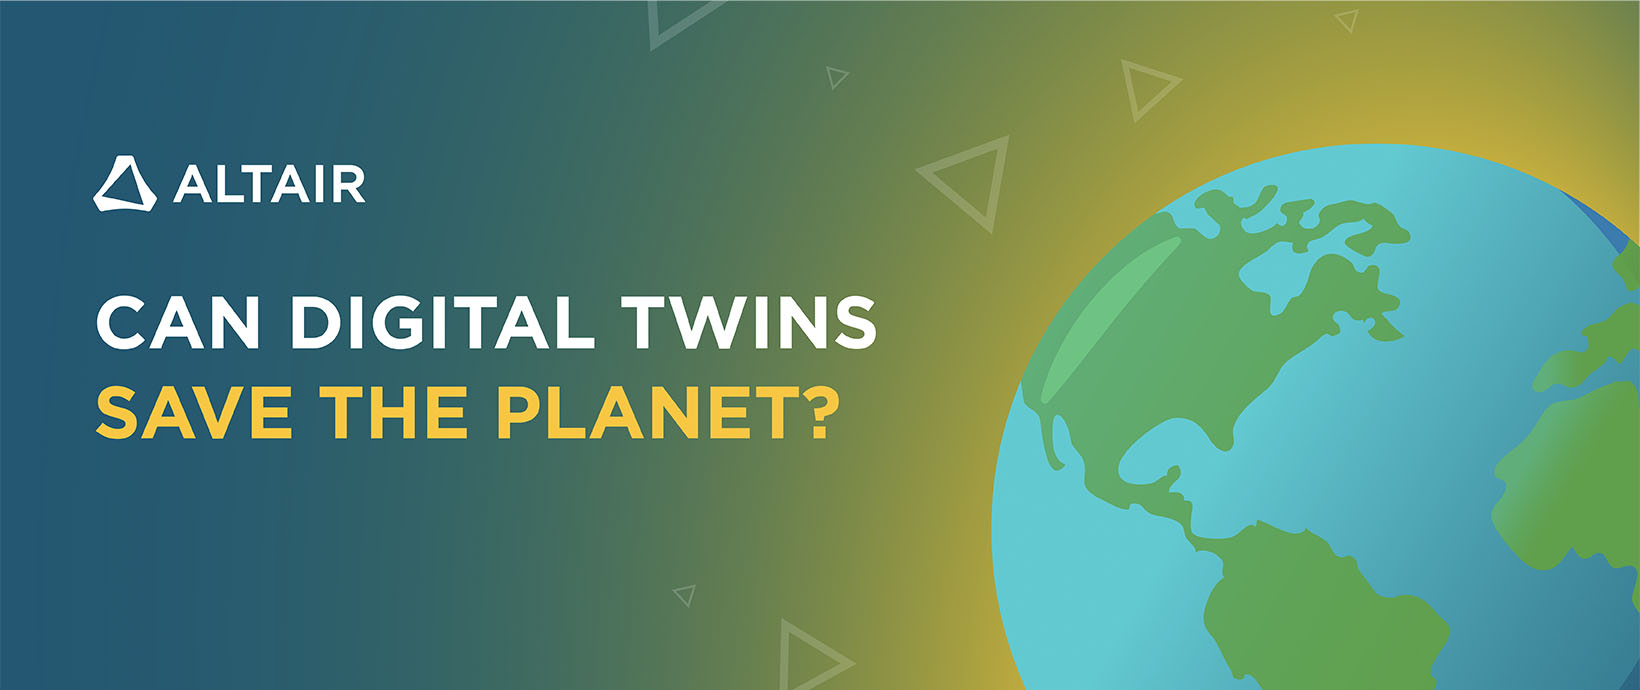 Can Digital Twins Save the Planet?